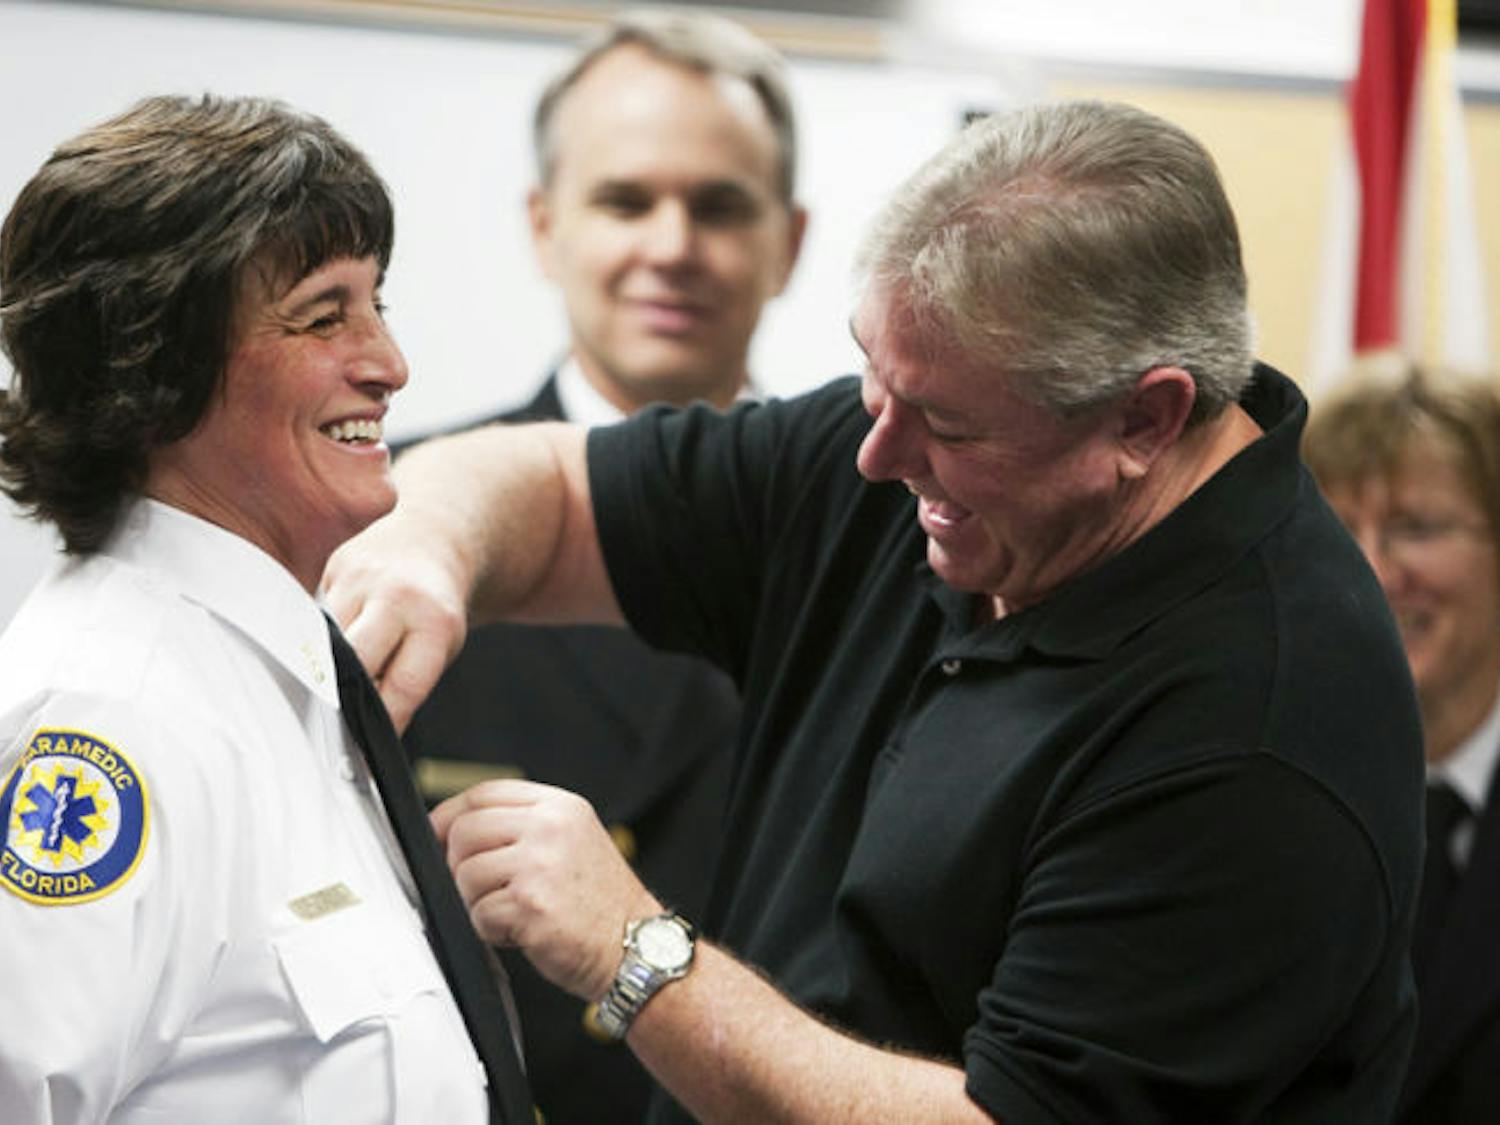 Elizabeth J. Braun receives a badge from her husband, George Braun, in honor of her promotion to lieutenant at a ceremony promoting Gainesville Fire Rescue members at about noon Thursday at the Support Services Bureau, 1026 NE 14 St.